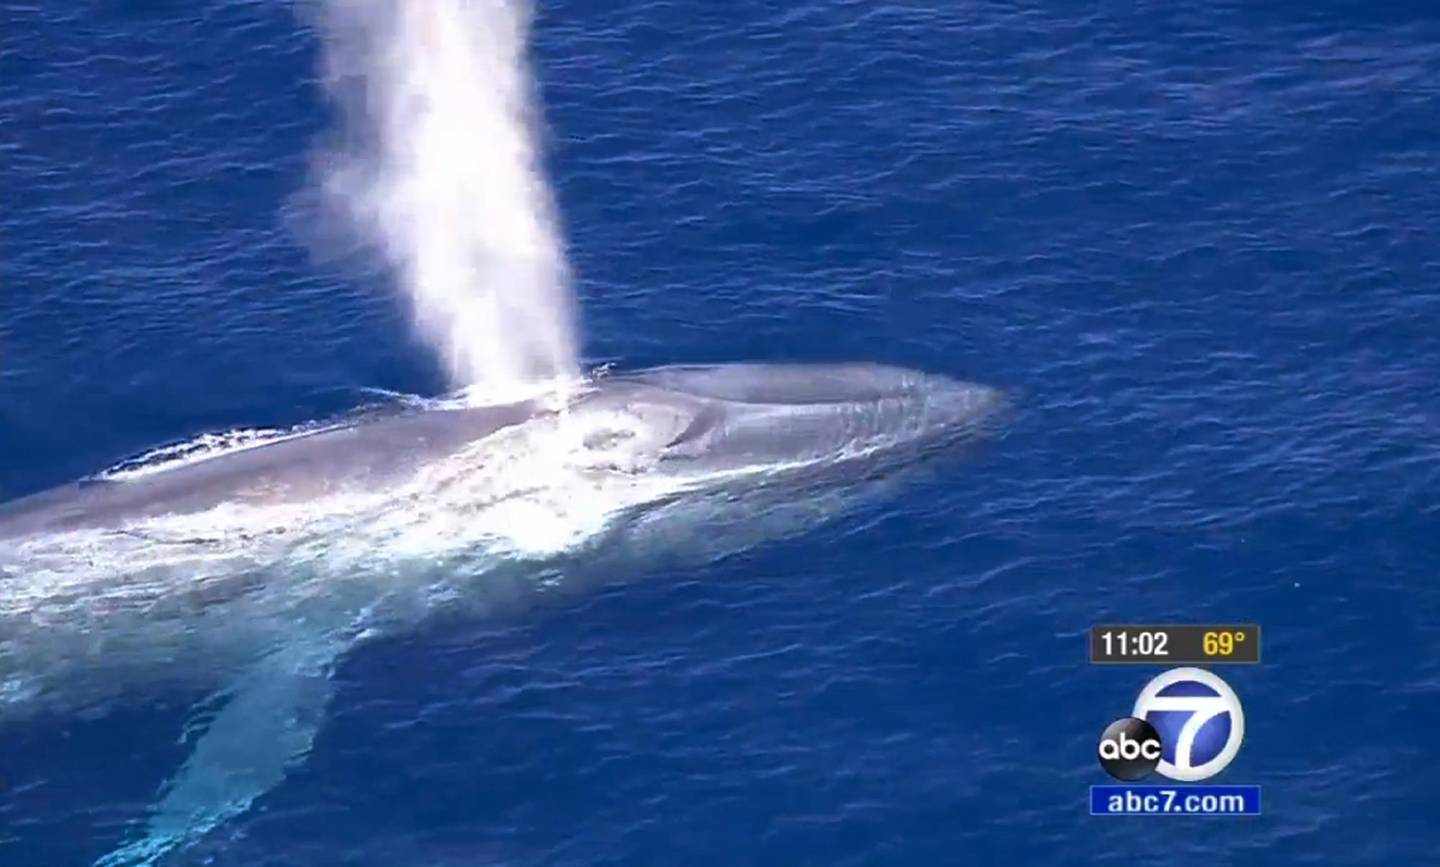 This Friday, Sept. 4, 2015, still image from video provided by KABC-TV, shows a blue whale that is tangled in fishing line, off the coast of Southern California near the Palos Verdes Peninsula. A disentanglement team from the National Oceanic and Atmospheric Administration arrived at the scene before sunset and attached a larger buoy to keep track of the whale but decided to hold off on efforts to cut or detach the line until Saturday. (KABC-TV via AP)